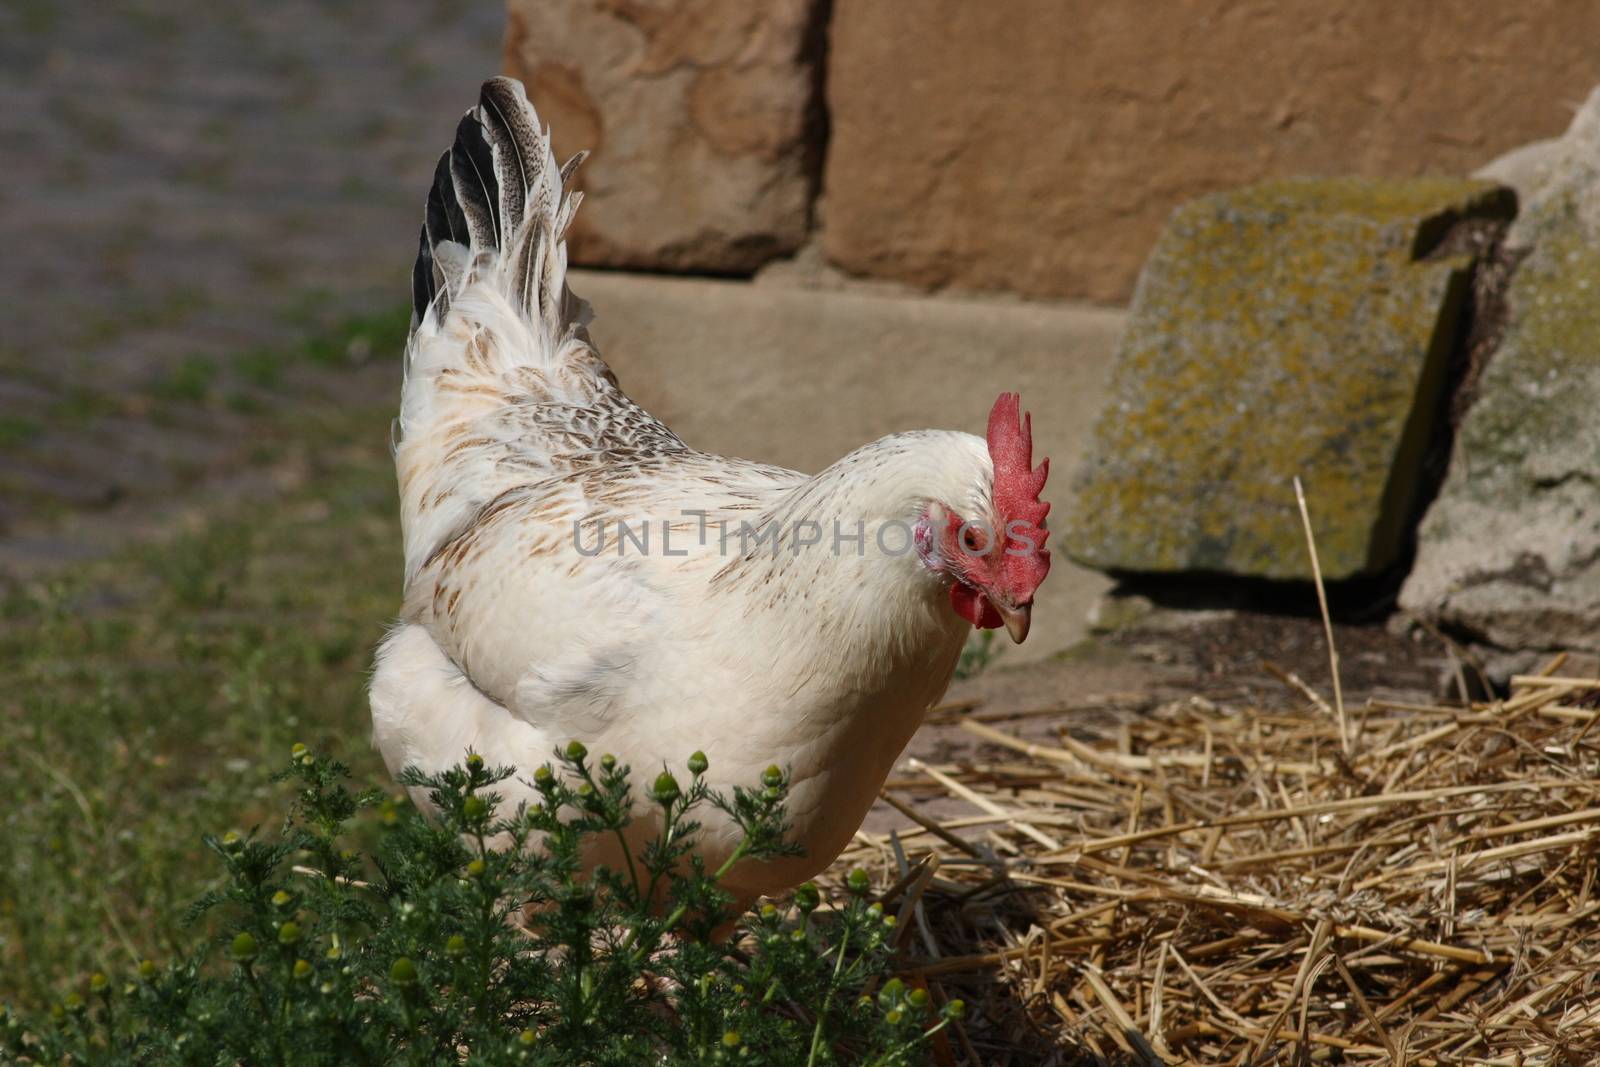 White chicken with red comb and black tail feathers